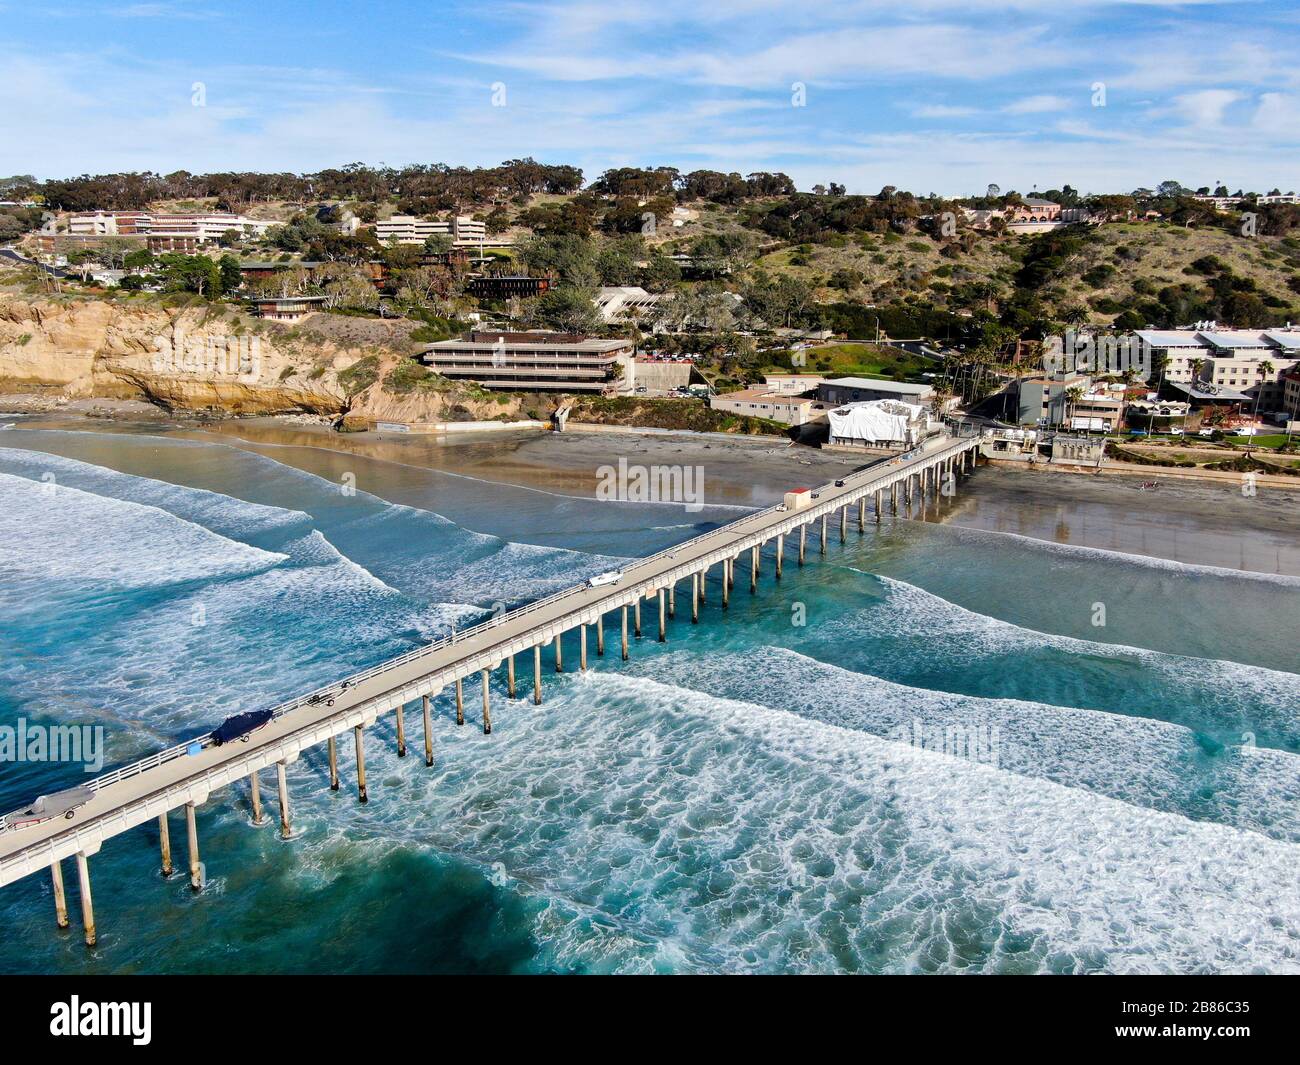 Aerial view of the scripps pier institute of oceanography, La Jolla, San Diego, California, USA. Research pier used to study ocean conditions and marine biology. Pier with luxury villa on the coast. Stock Photo